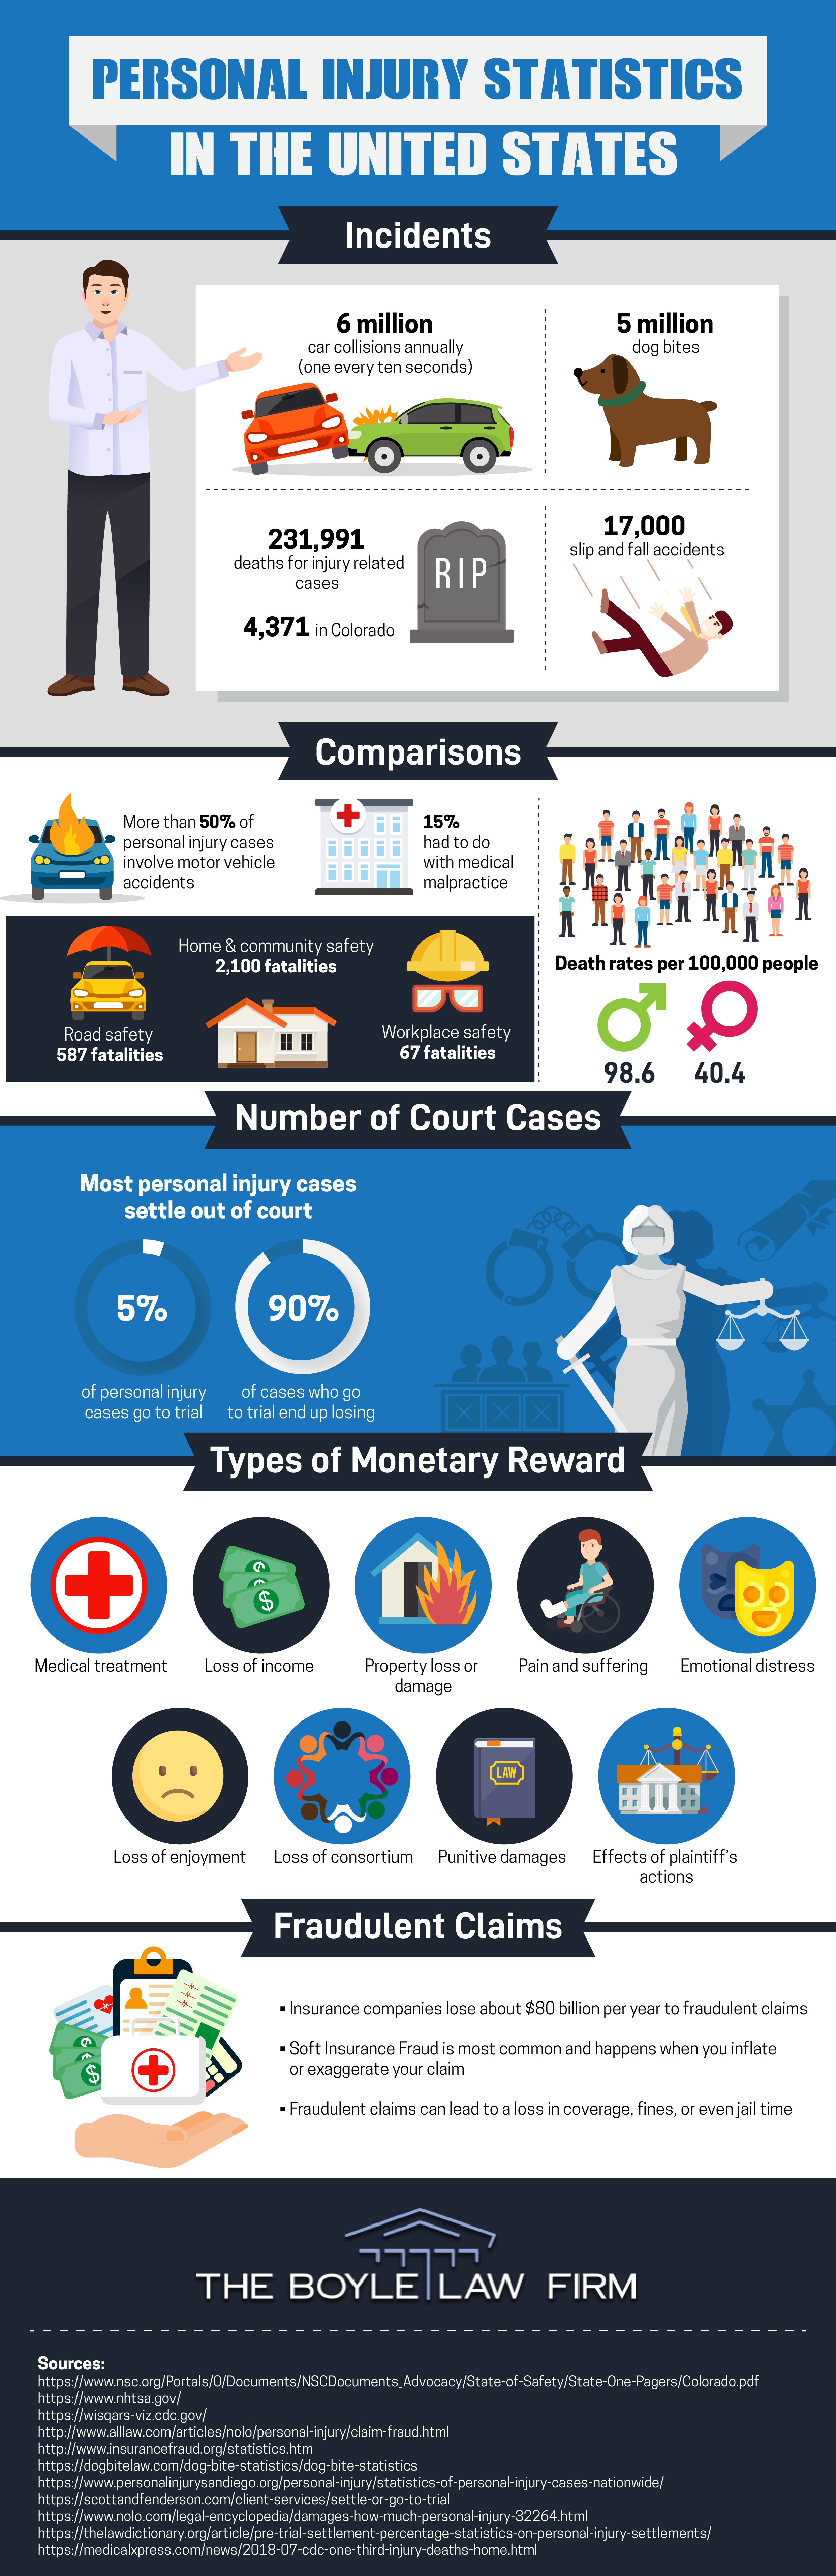 Personal Injury Statistics in The United States